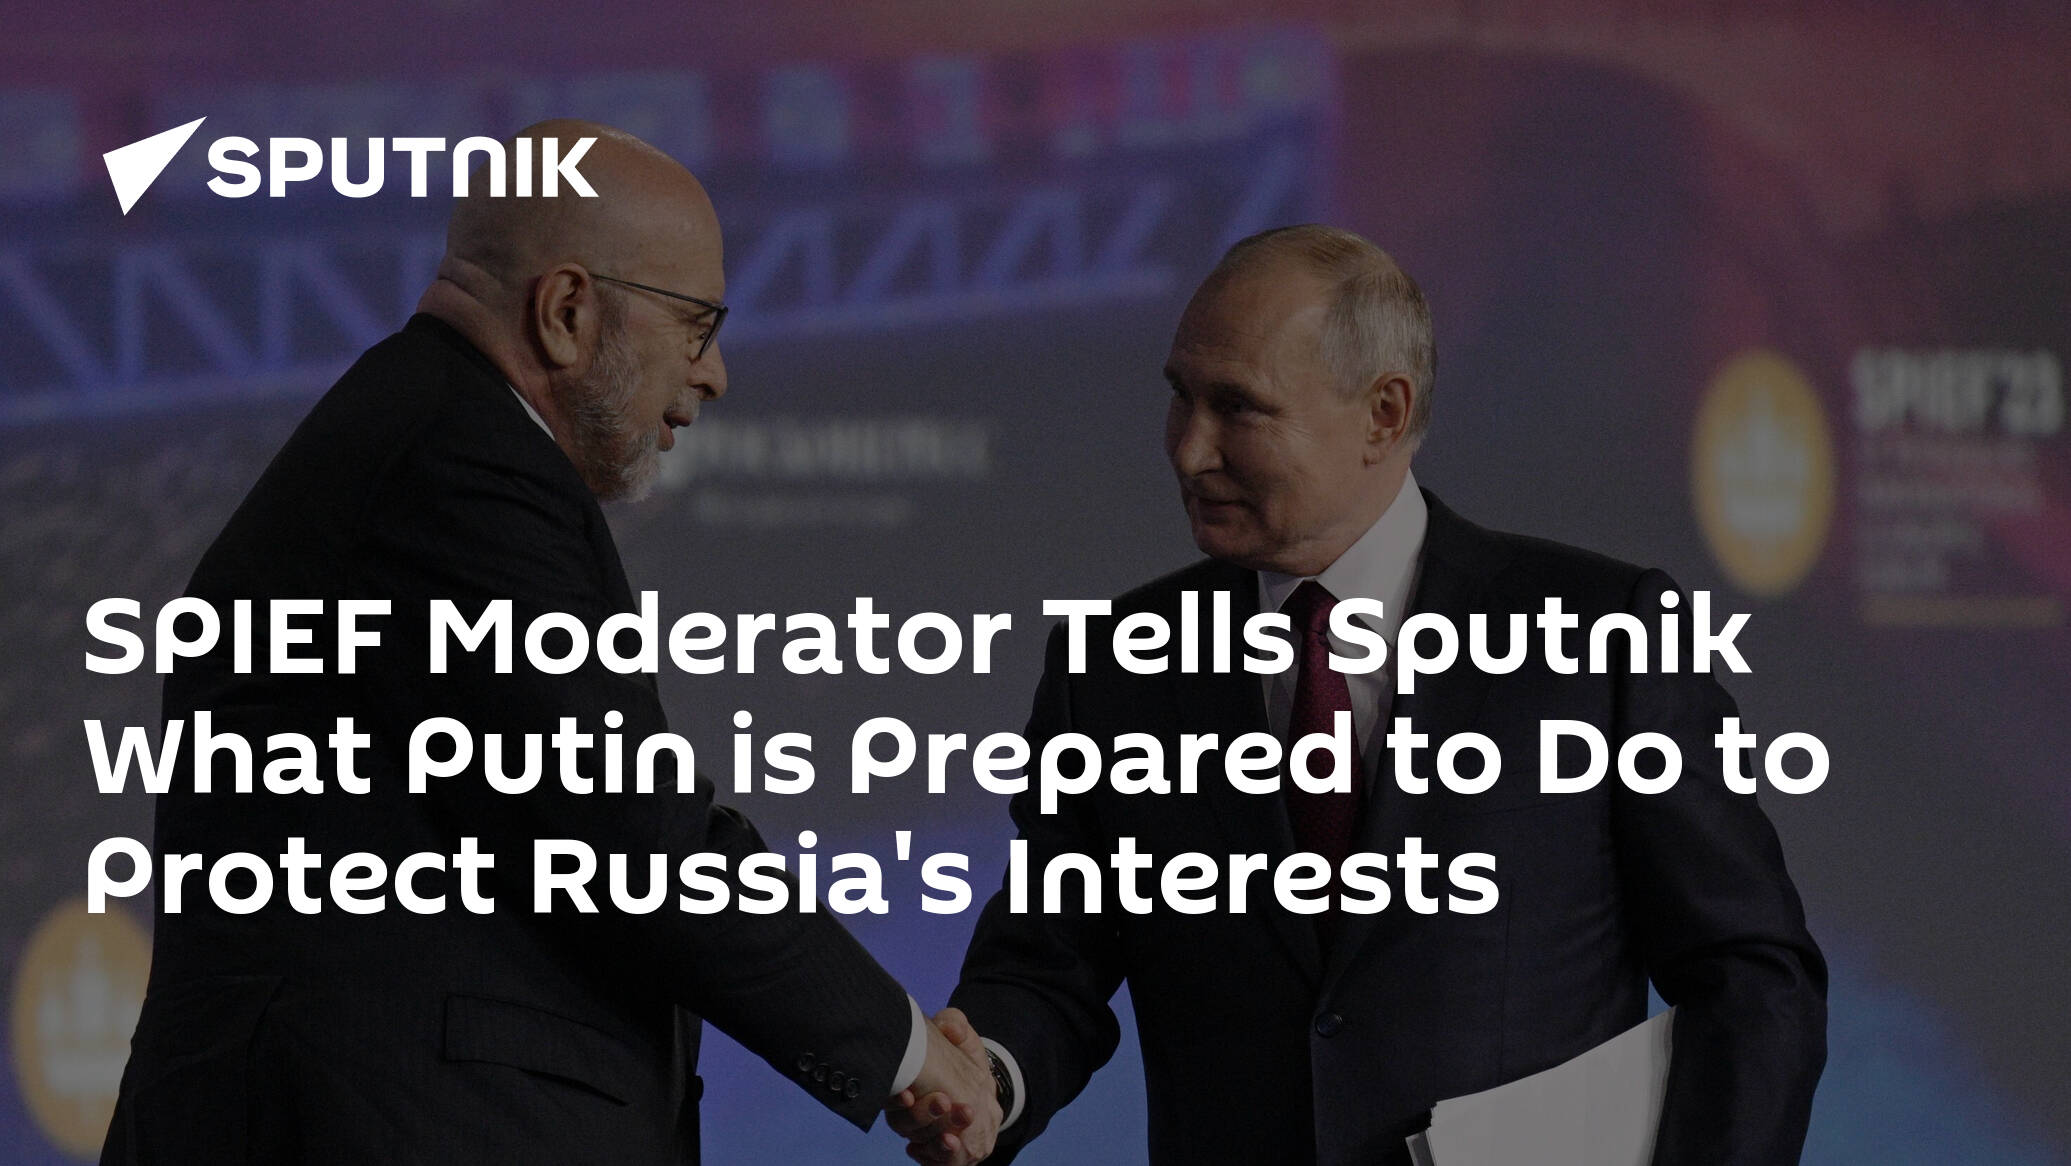 SPIEF Moderator Tells Sputnik What Putin is Prepared to Do to Protect Russia's Interests